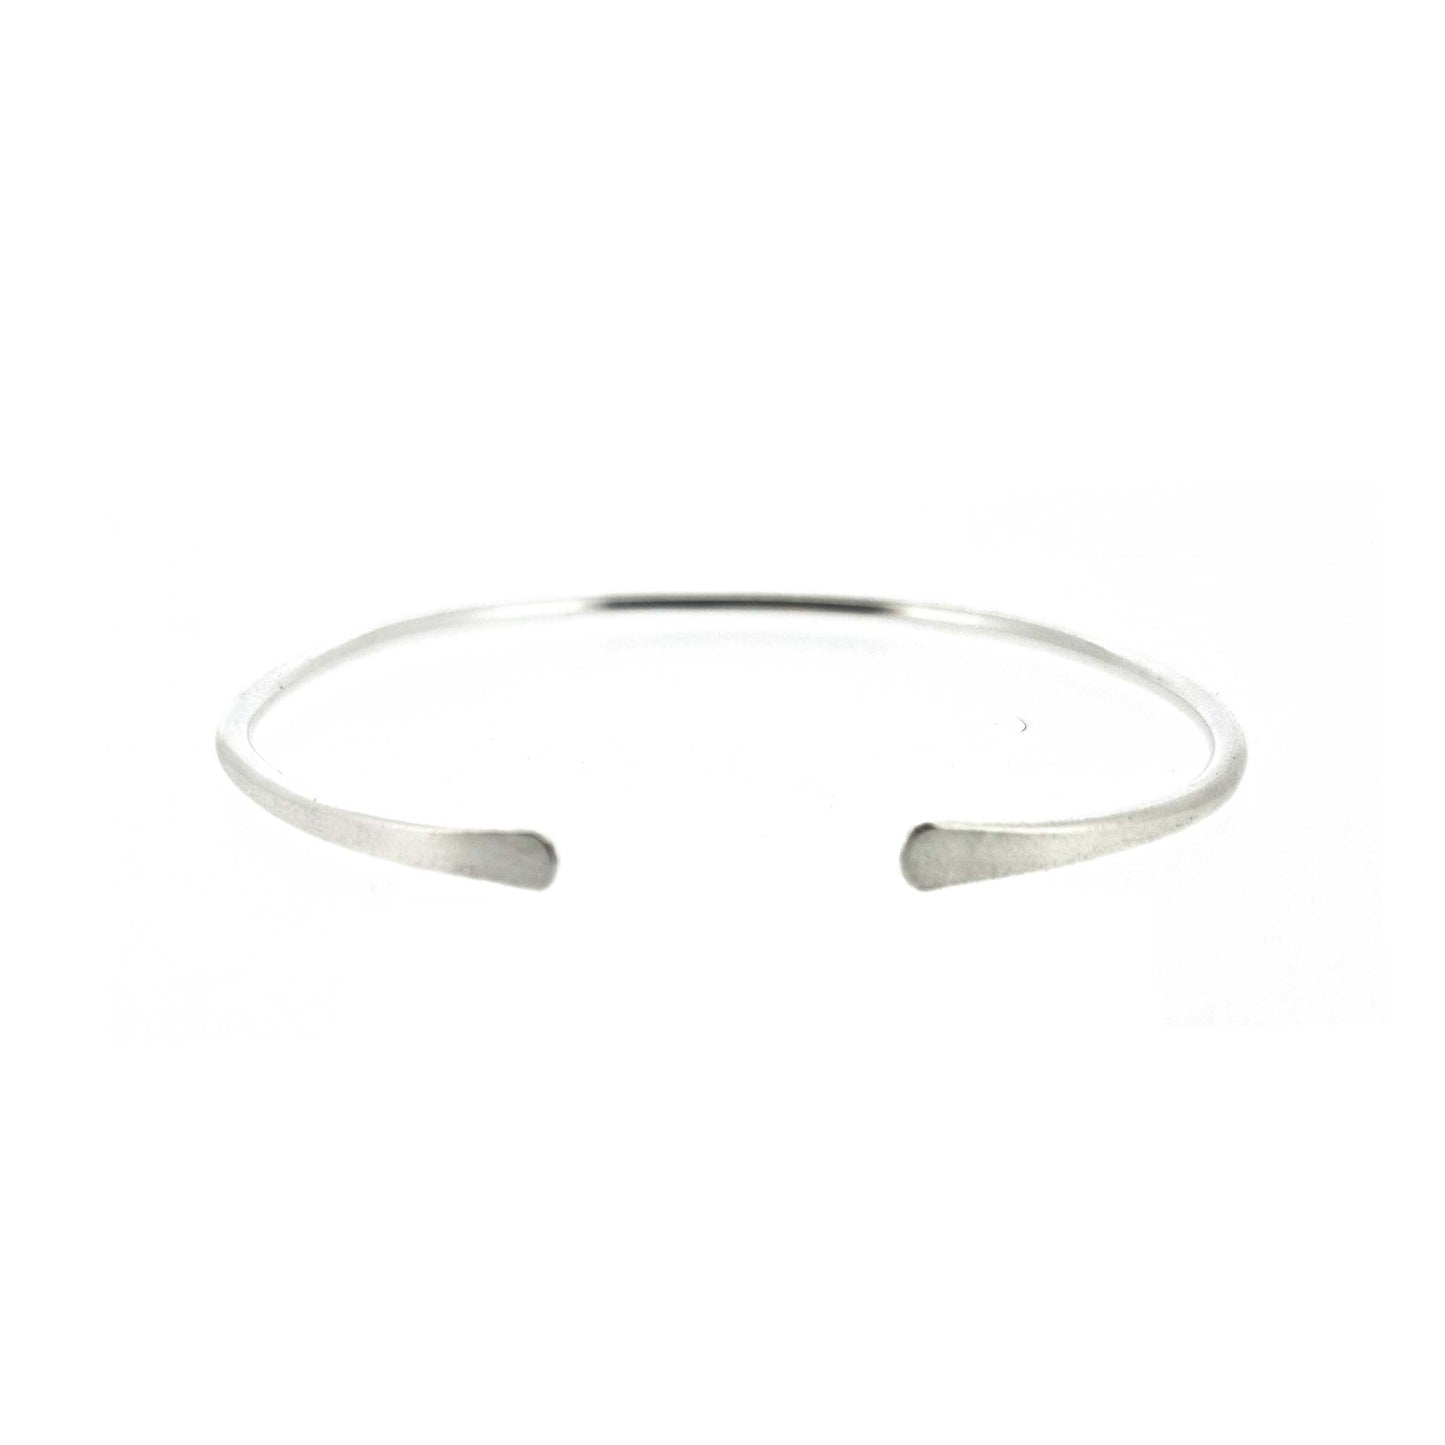 A silver open torque bangle with flattened ends.